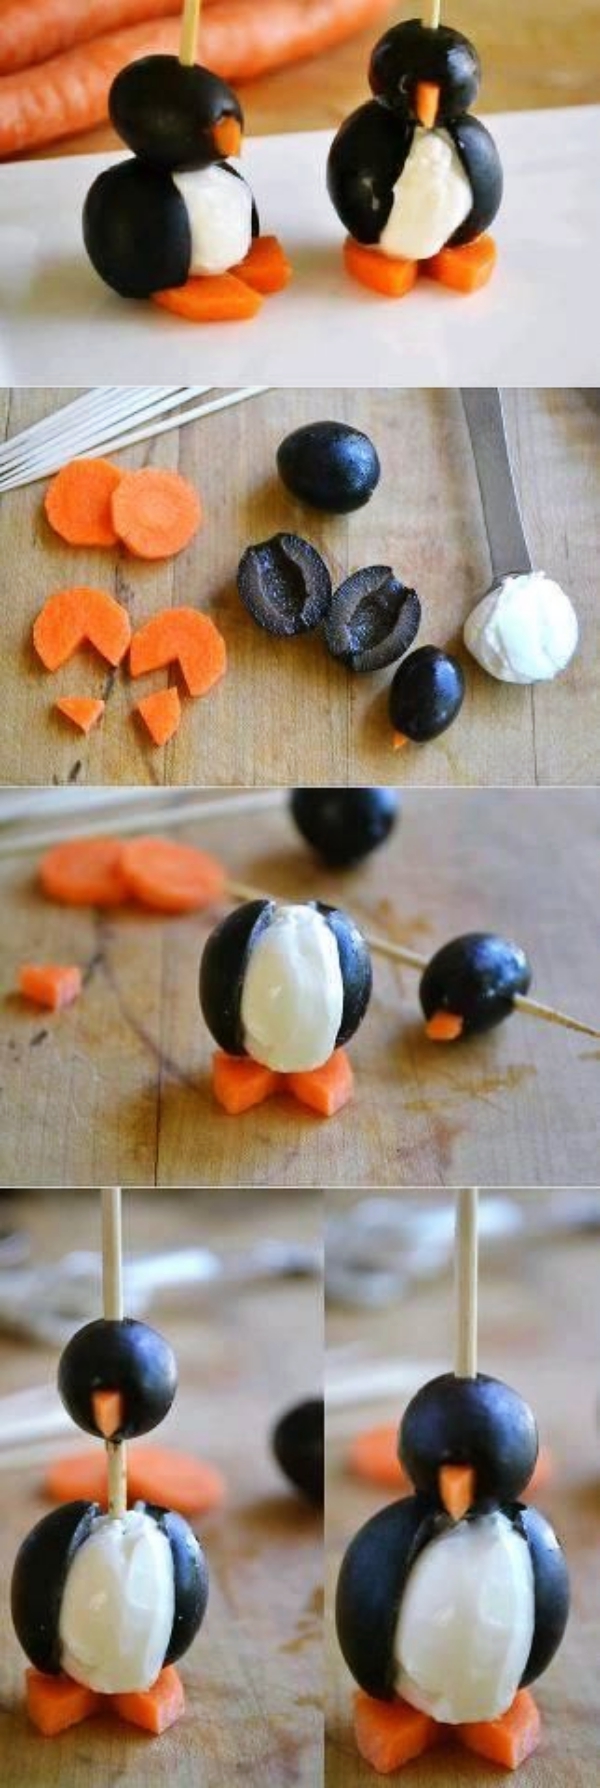 Clever-and-Innovative-Food-Presentation-Ideas